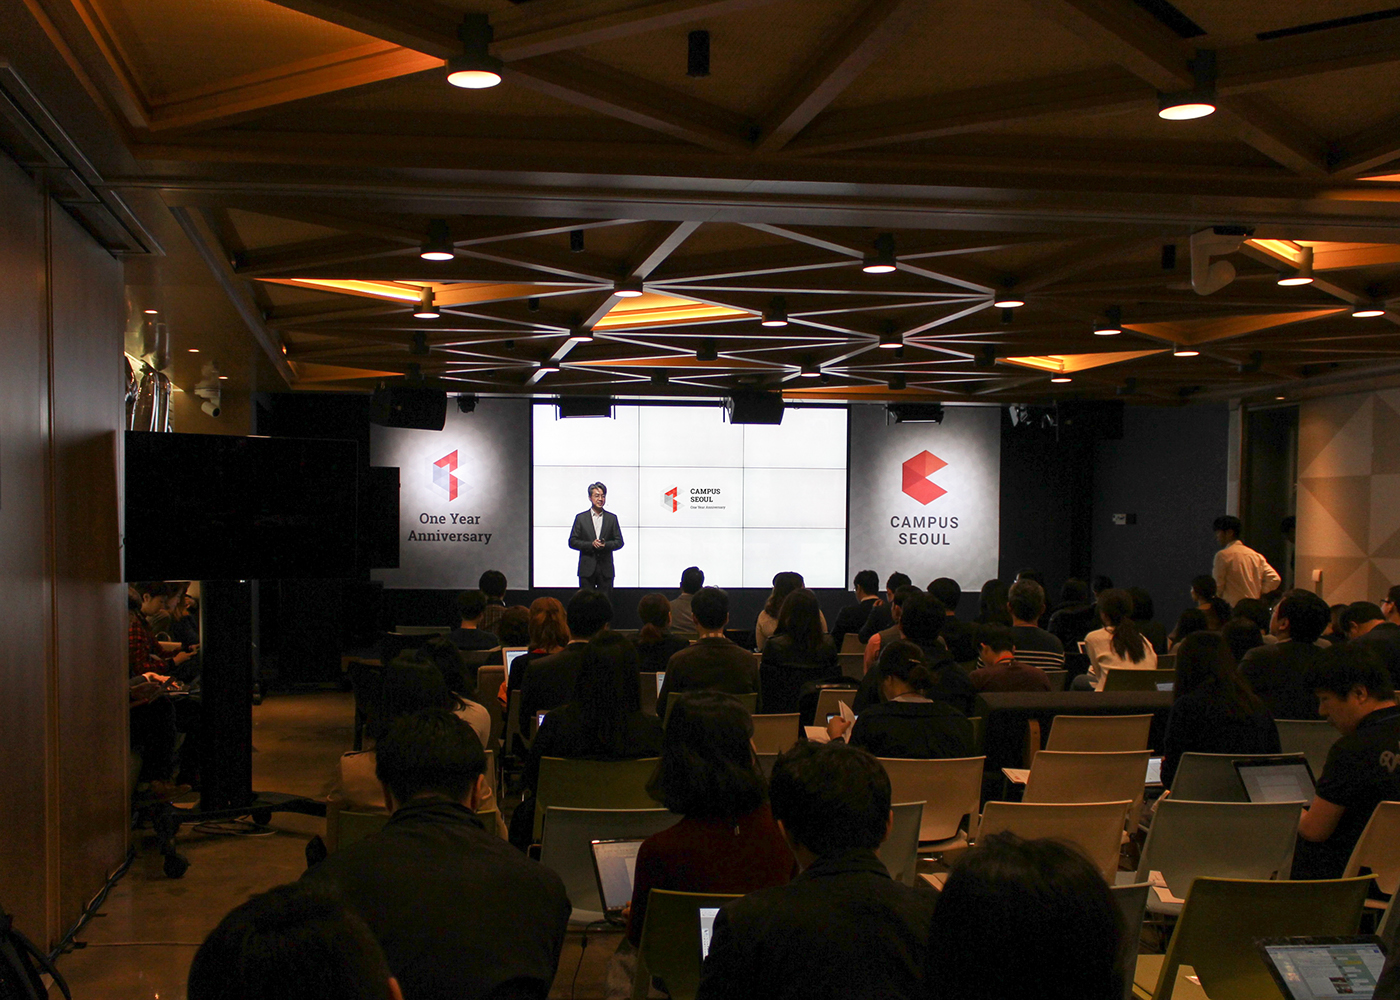 campus seoul Campus Seoul google start up one year anniversary One anniversary Event